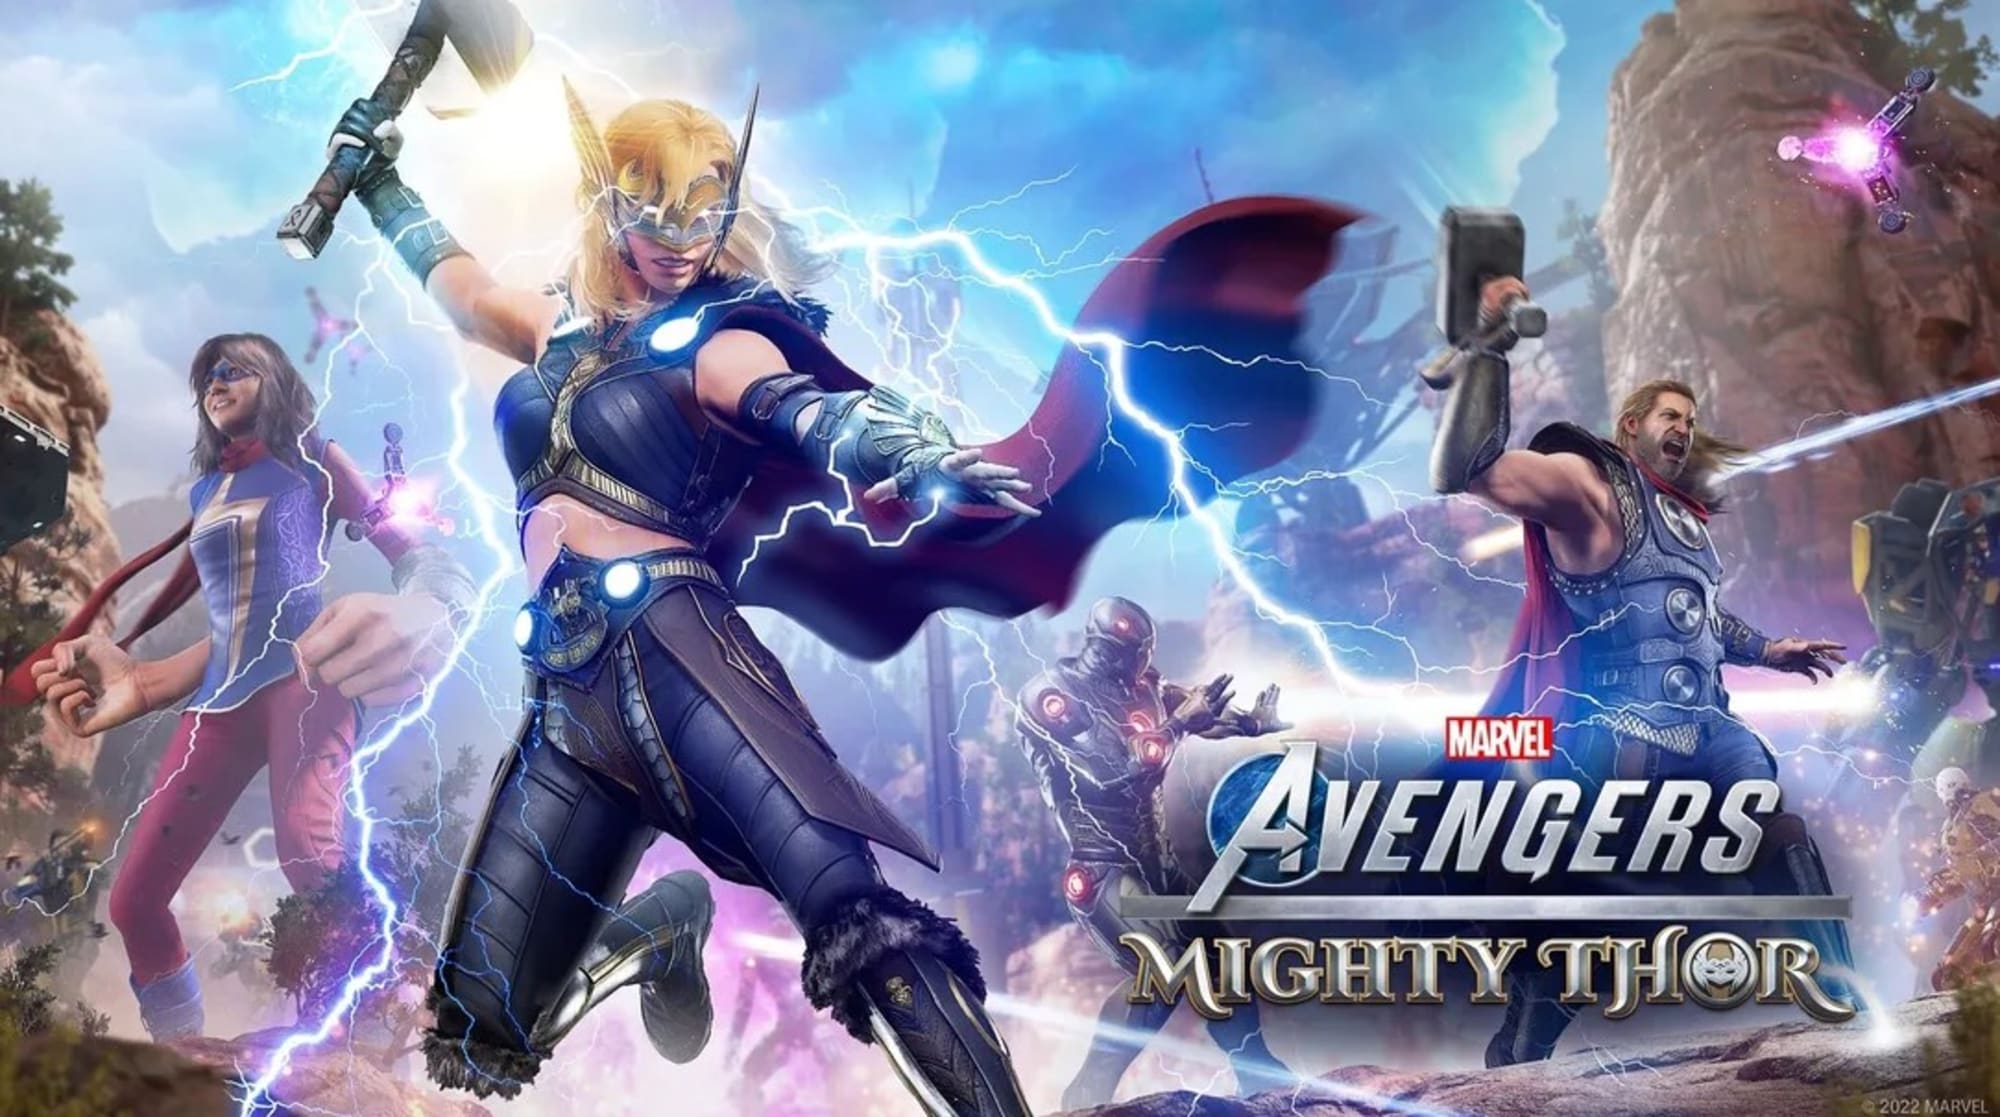 Jane Foster, aka The Mighty Thor, arrives in Marvel’s Avengers today